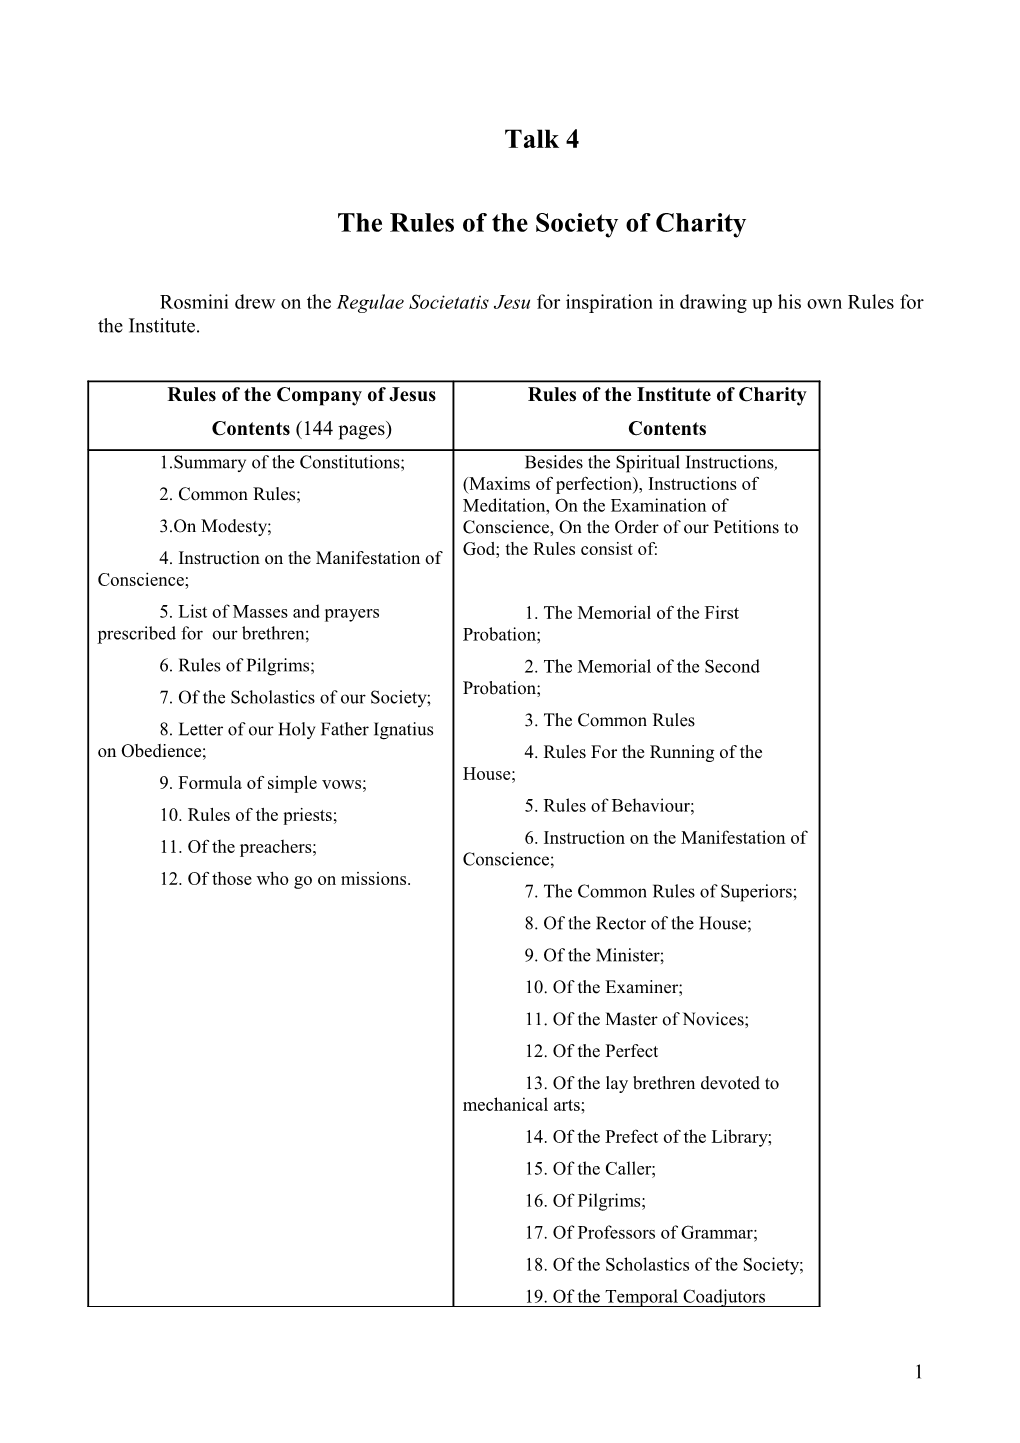 The Rules of the Society of Charity